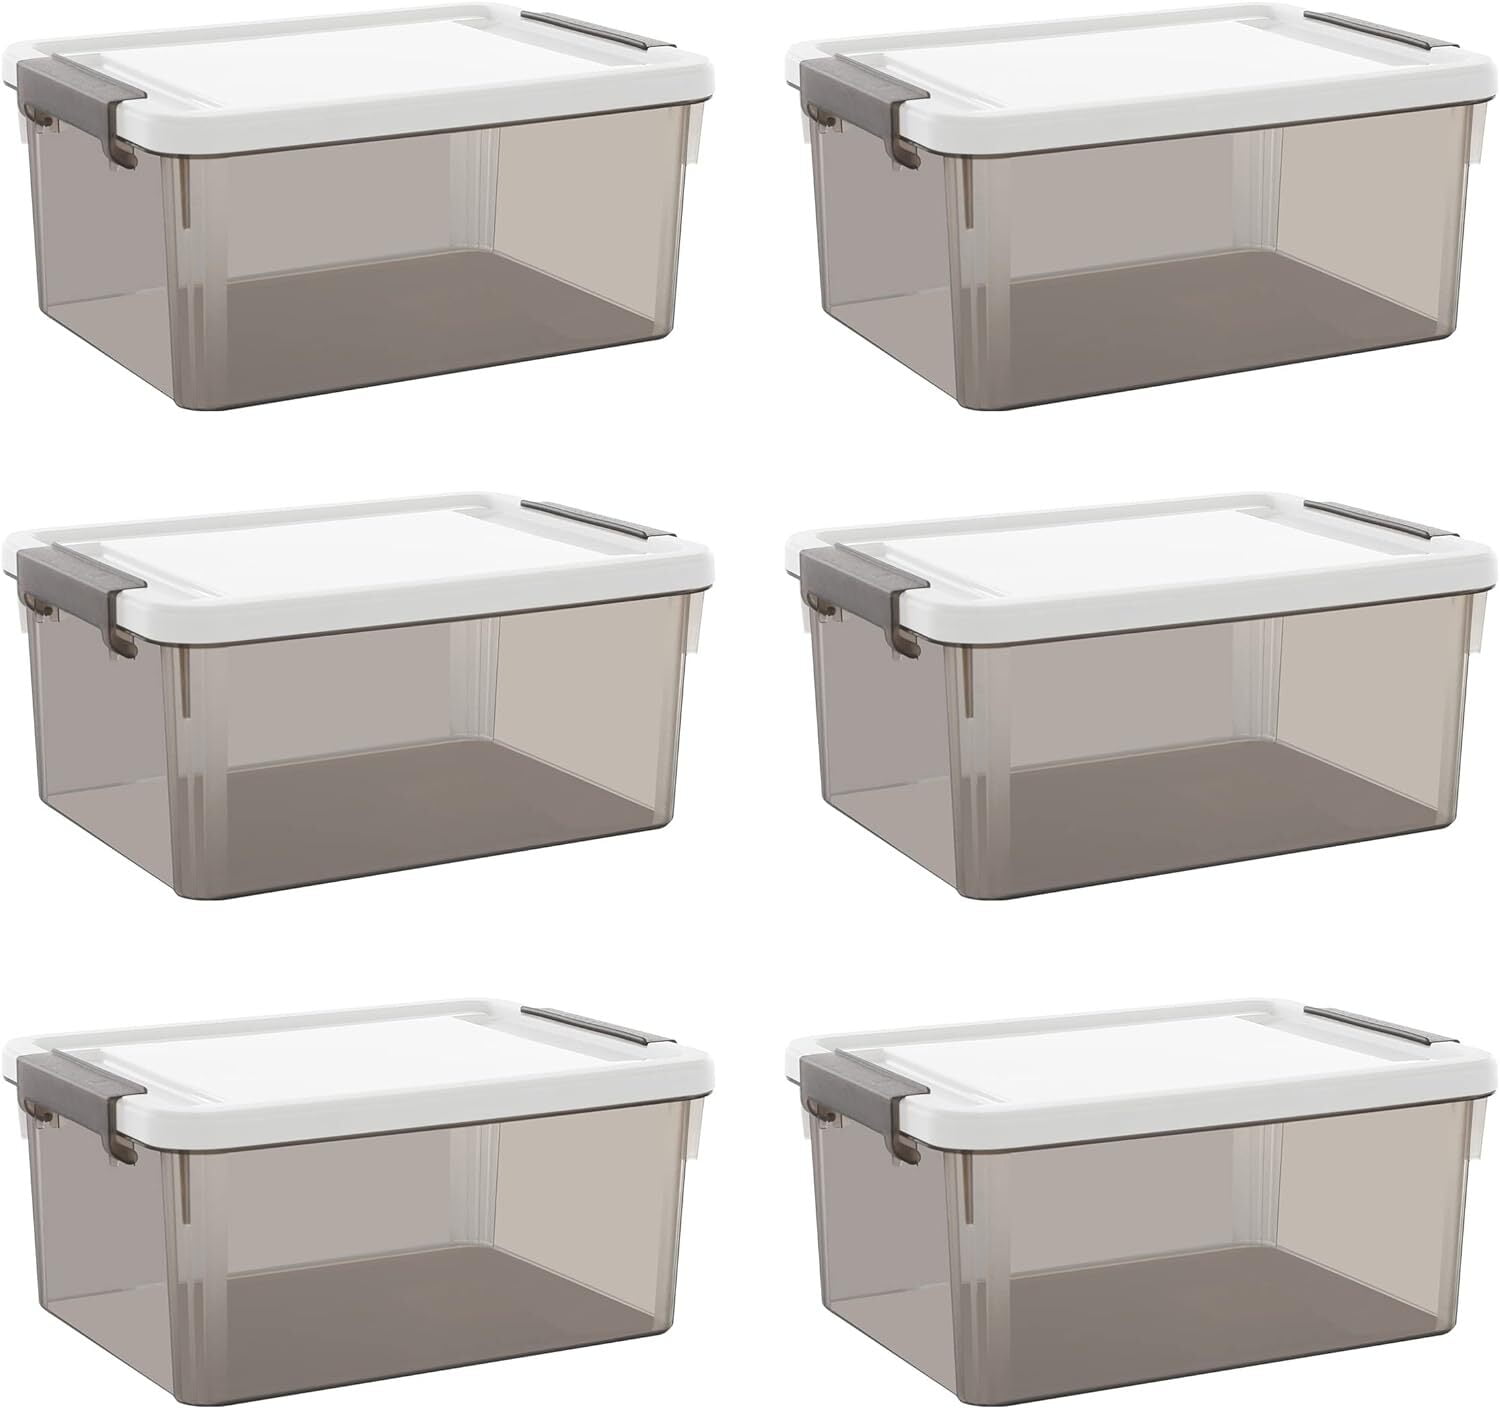 ULREON Citylife 6 Packs Small Storage Bins with Lids 3.2 qt Plastic Storage Containers for Organizing Stackable Clear Storage B, Size: 9.1 x 6.7 x 4.1